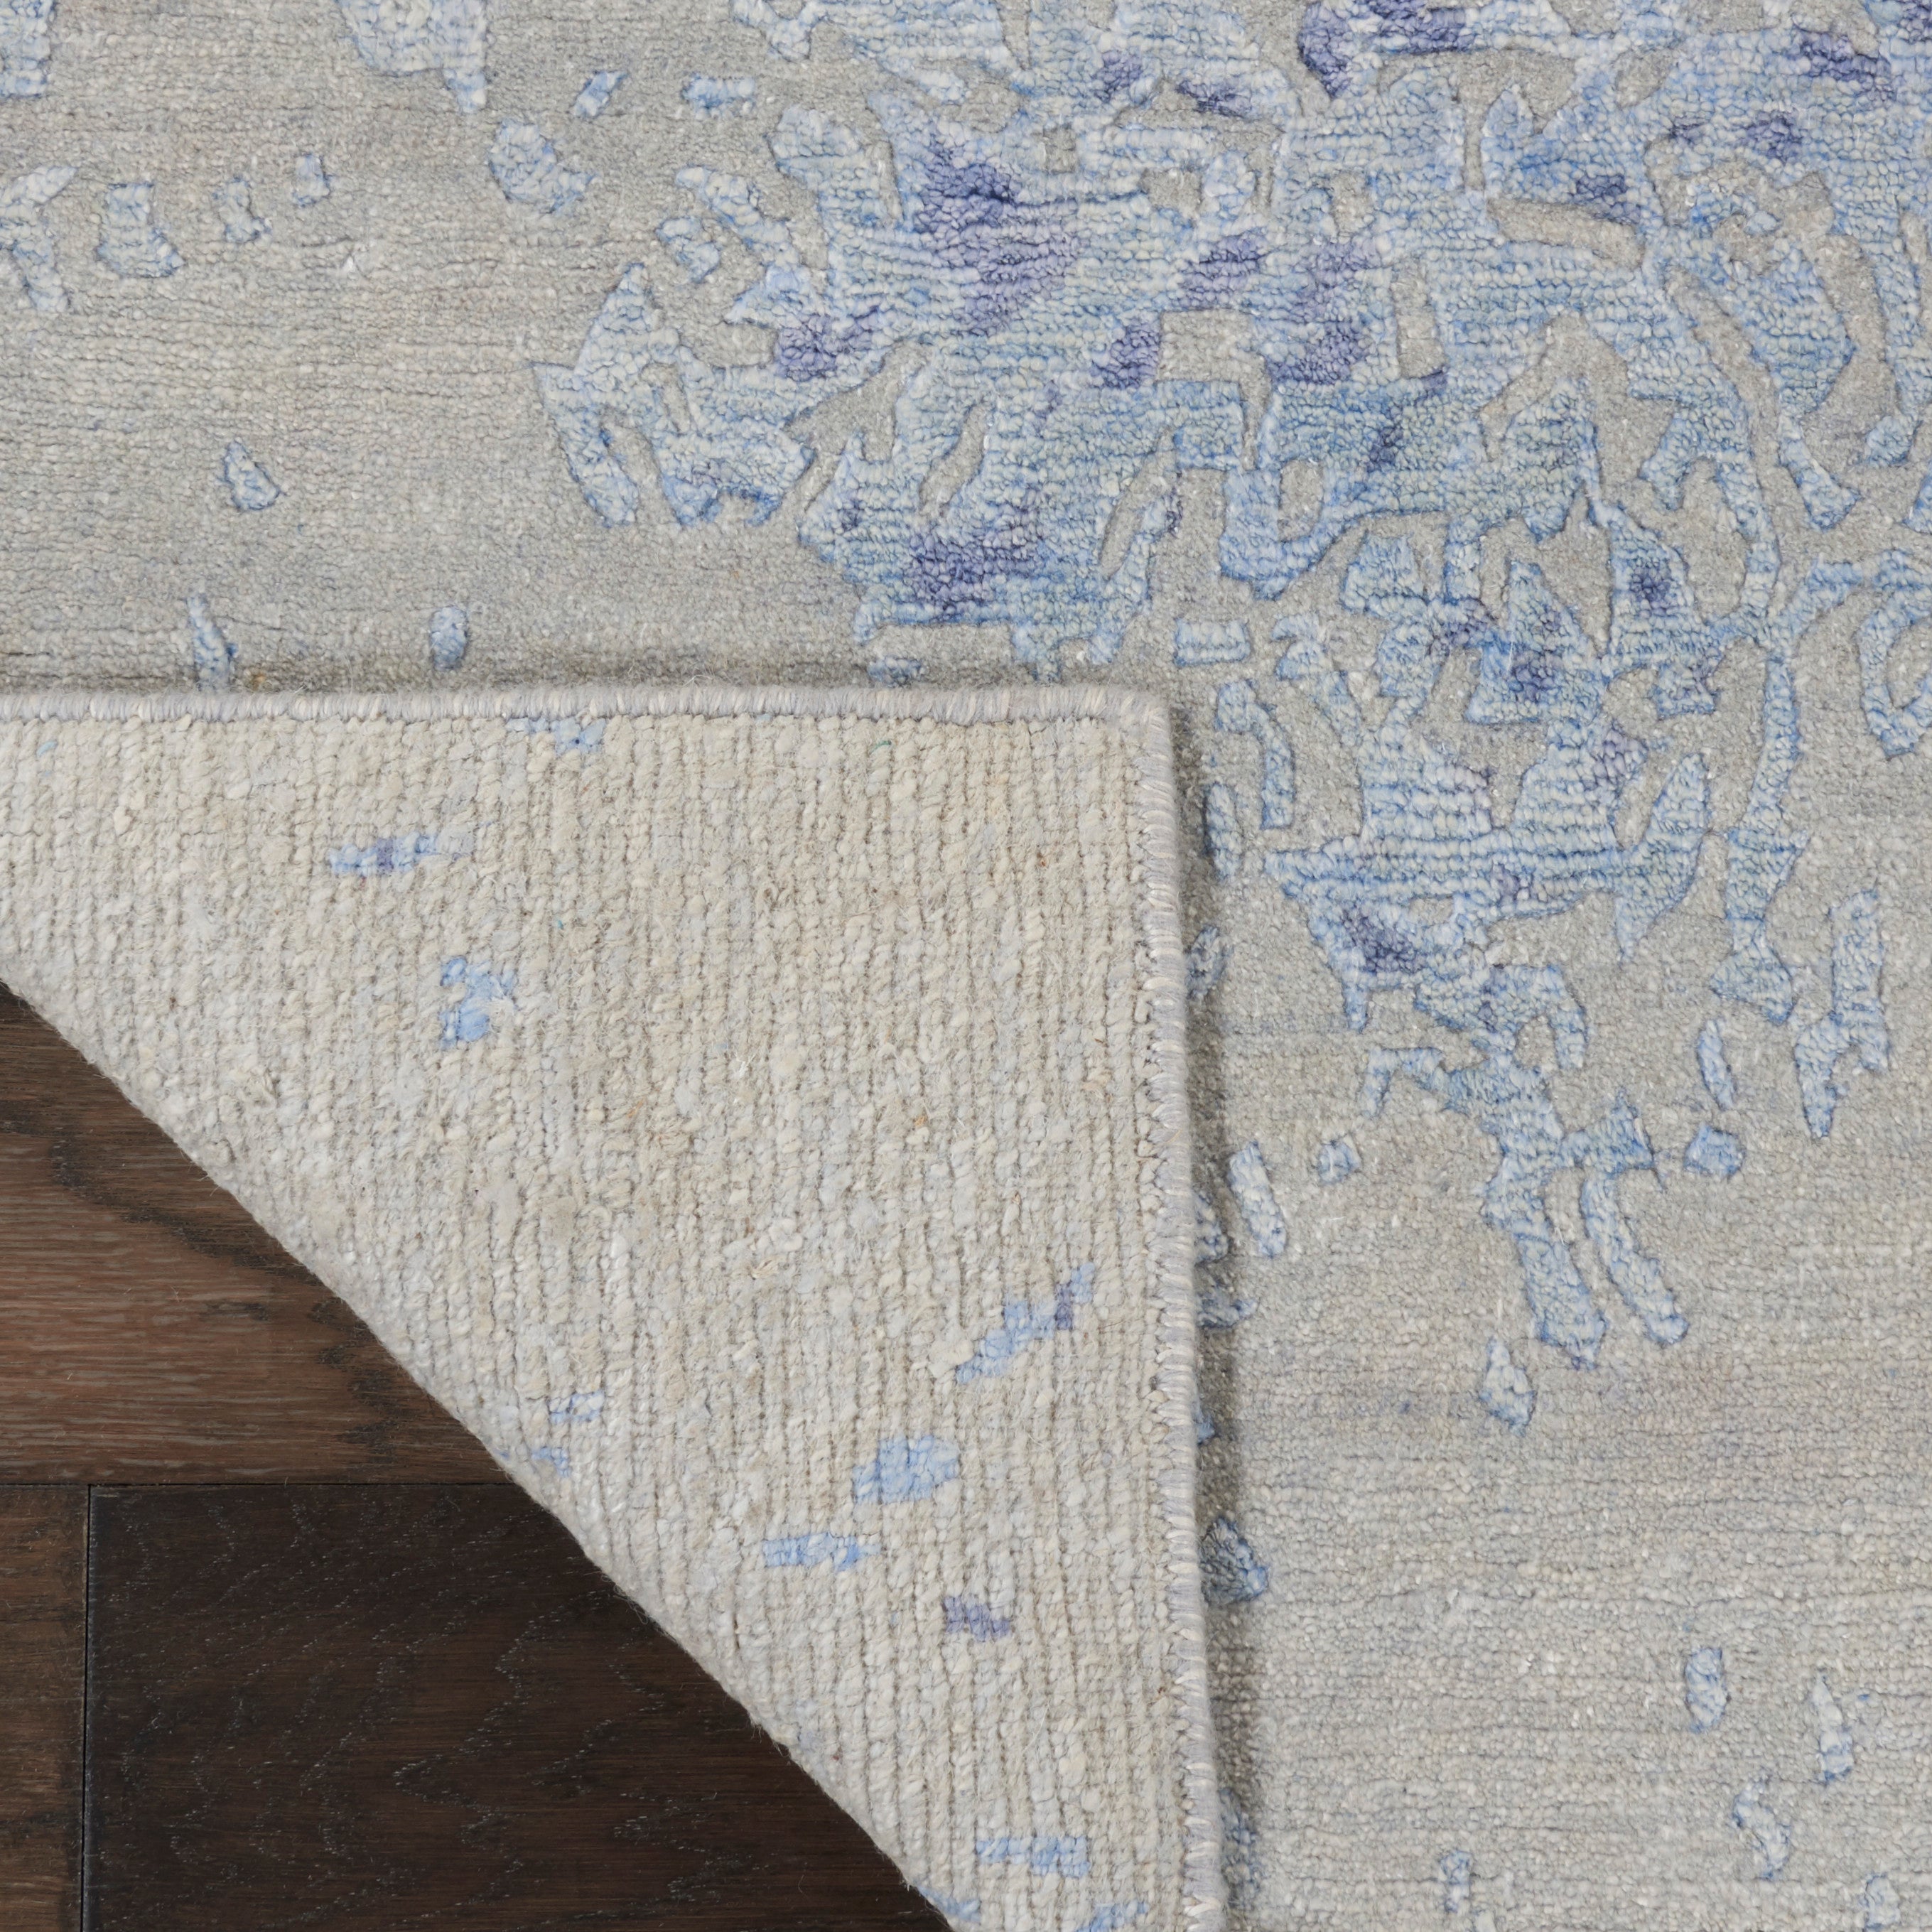 Close-up of high-quality, modern rug with abstract blue design on wooden floor.